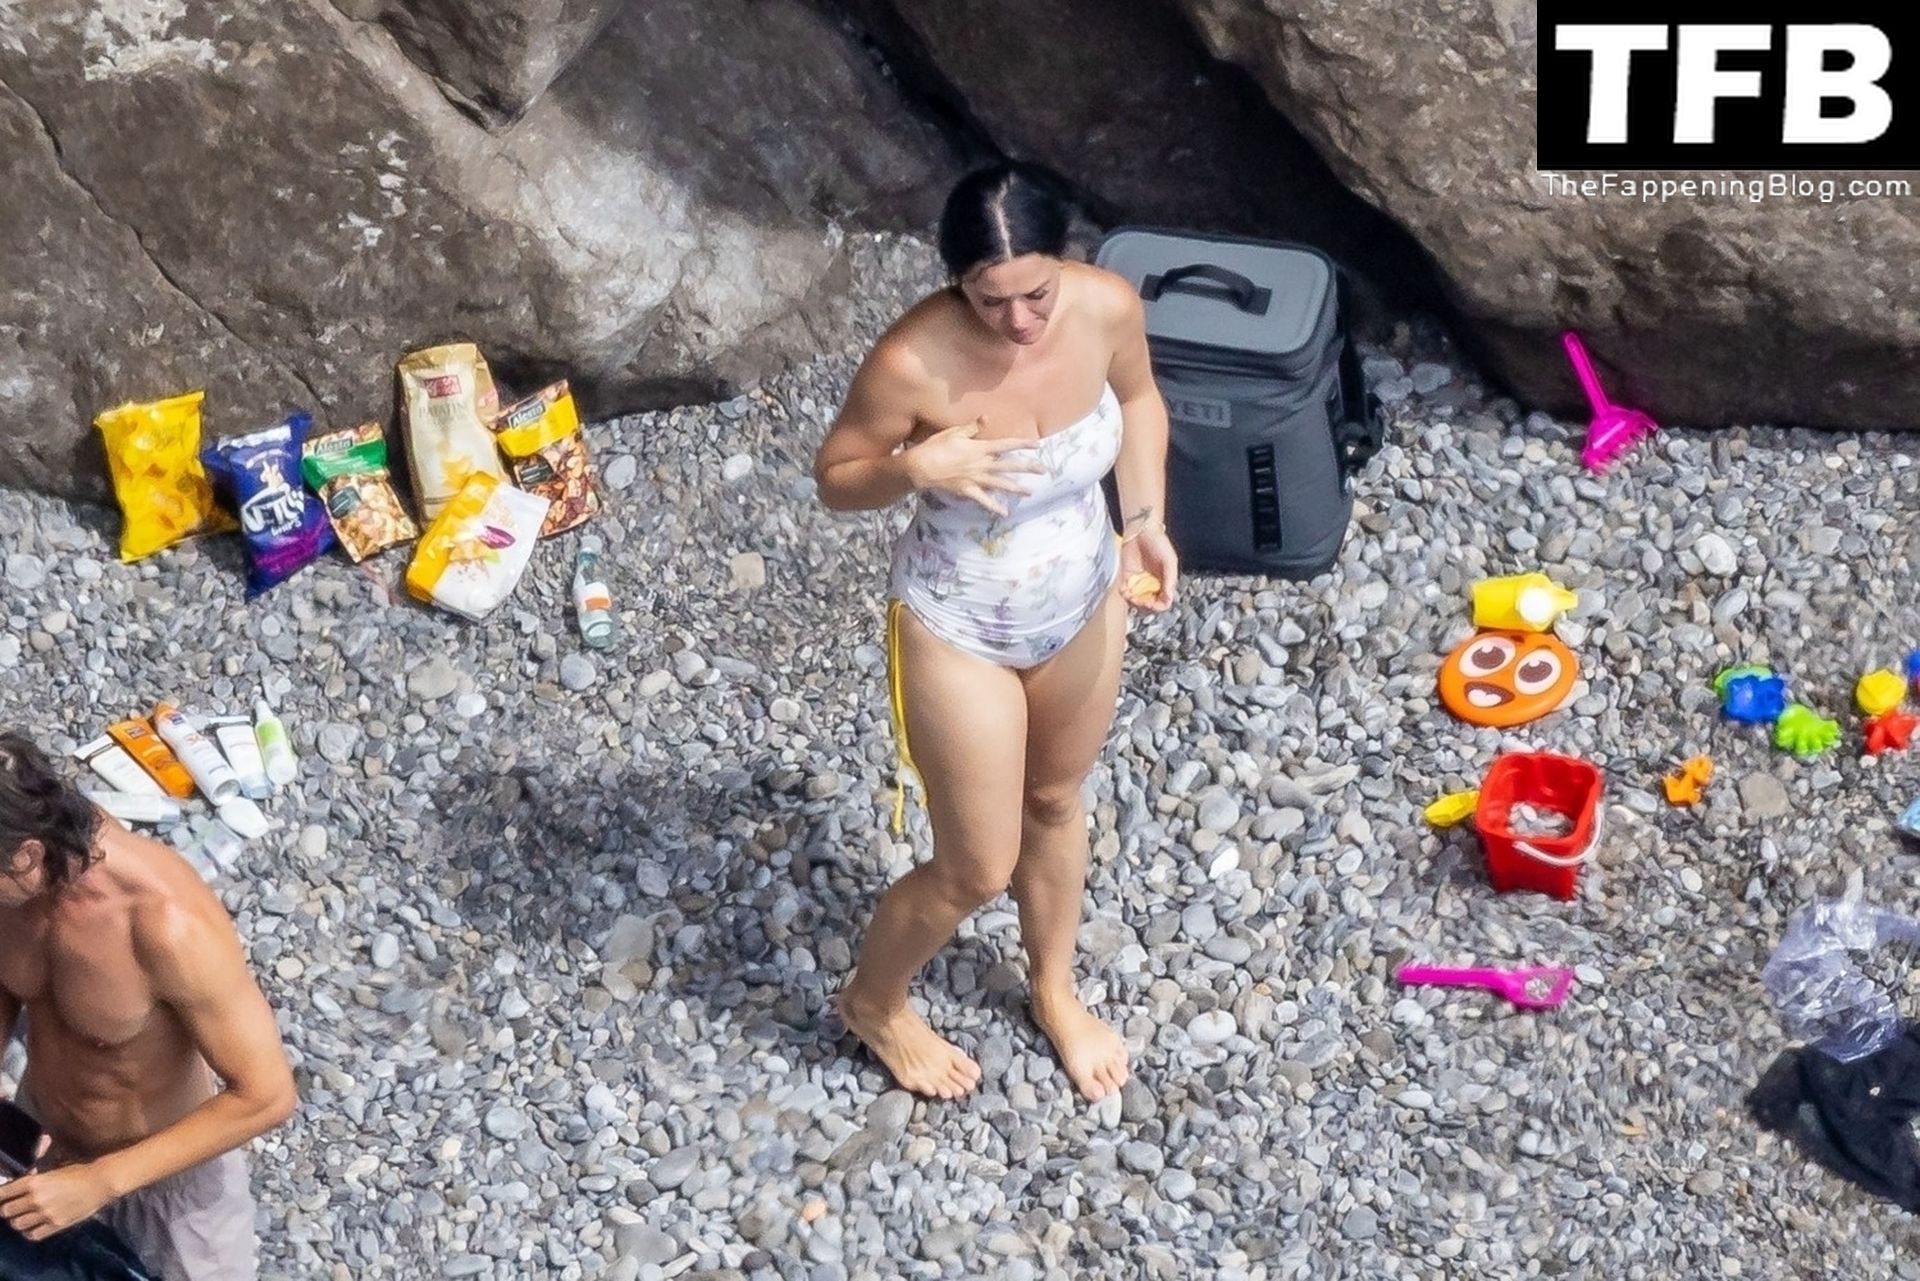 Katy Perry Sexy The Fappening Blog 52 - Katy Perry Rocks a Strapless Swimsuit While Enjoying a Beach Day with Orlando Bloom in Positano (105 Photos)